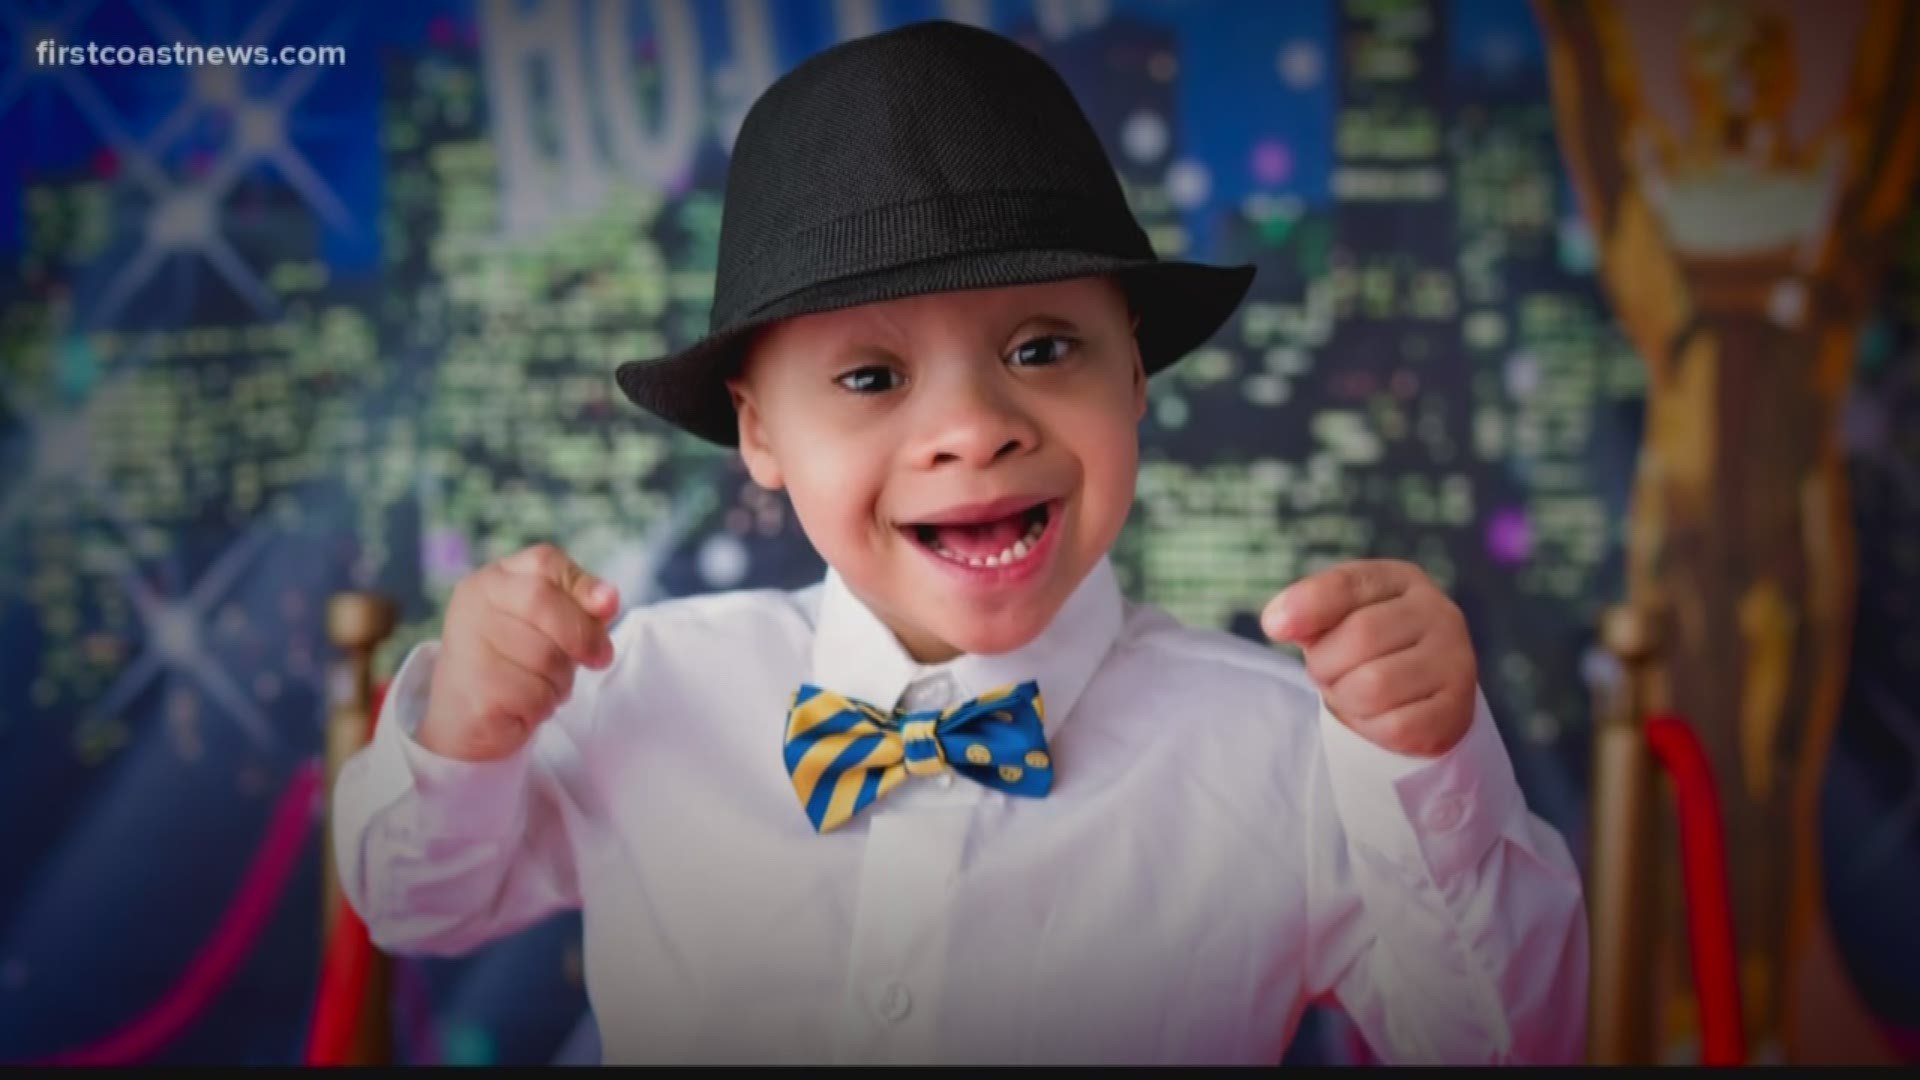 "They exude joy and happiness and love and I just feel how lucky am I to capture that through my lens and share it with the world because we need this." The calendar benefits Down Syndrome resources.